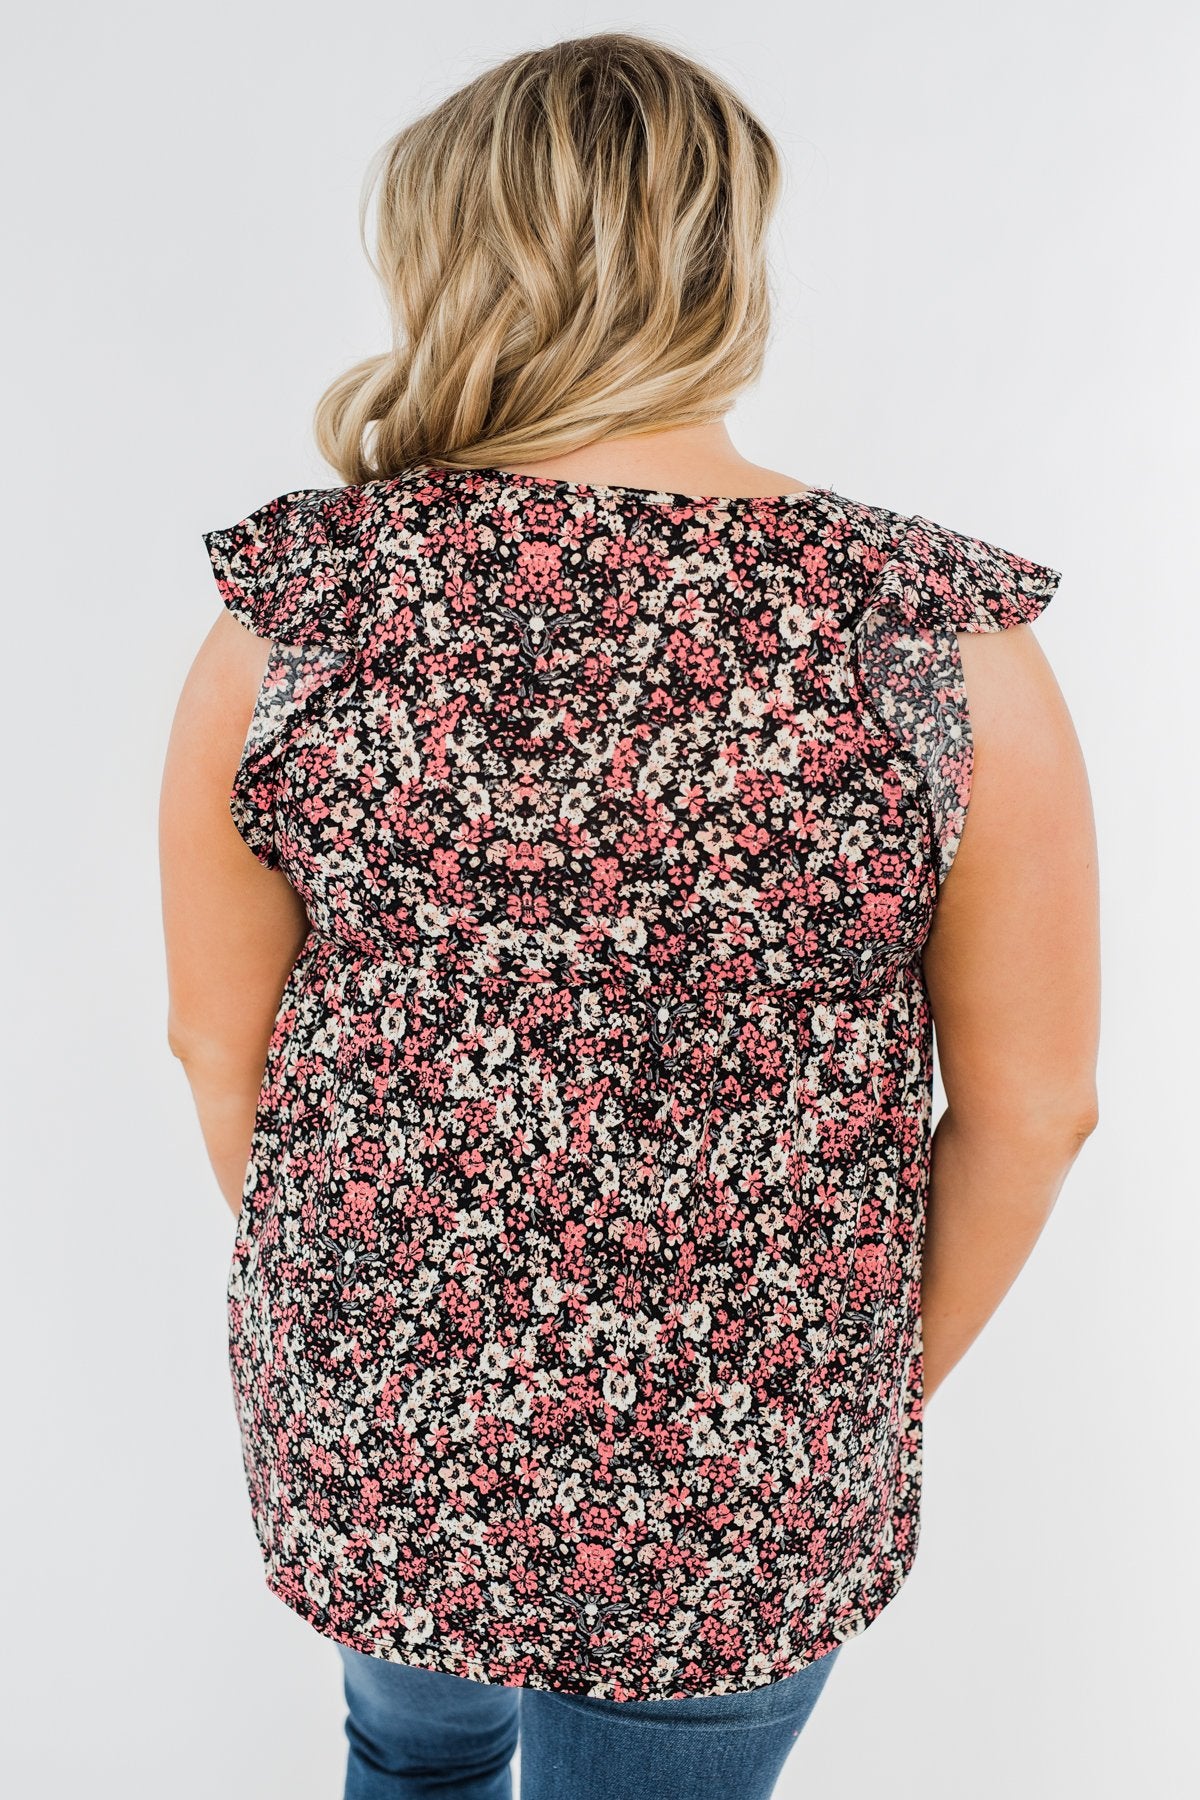 Chase Your Dreams Floral Ruffle Top- Black & Pink